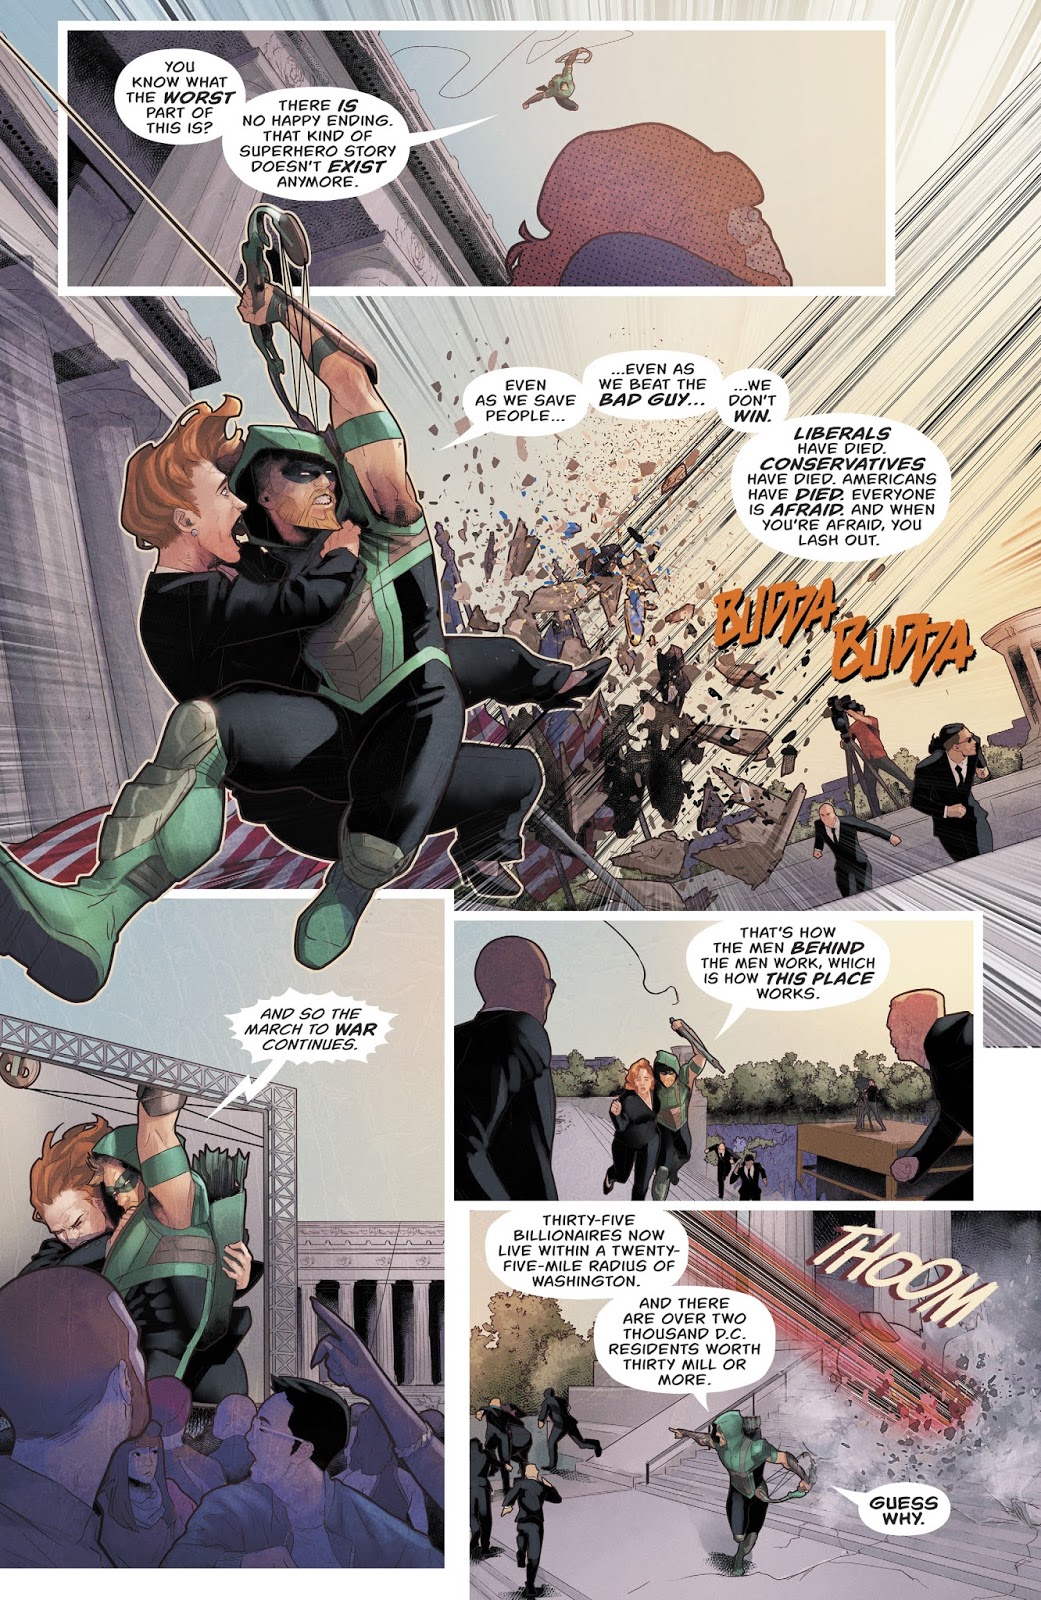 What Green Arrow Hopes For The United States